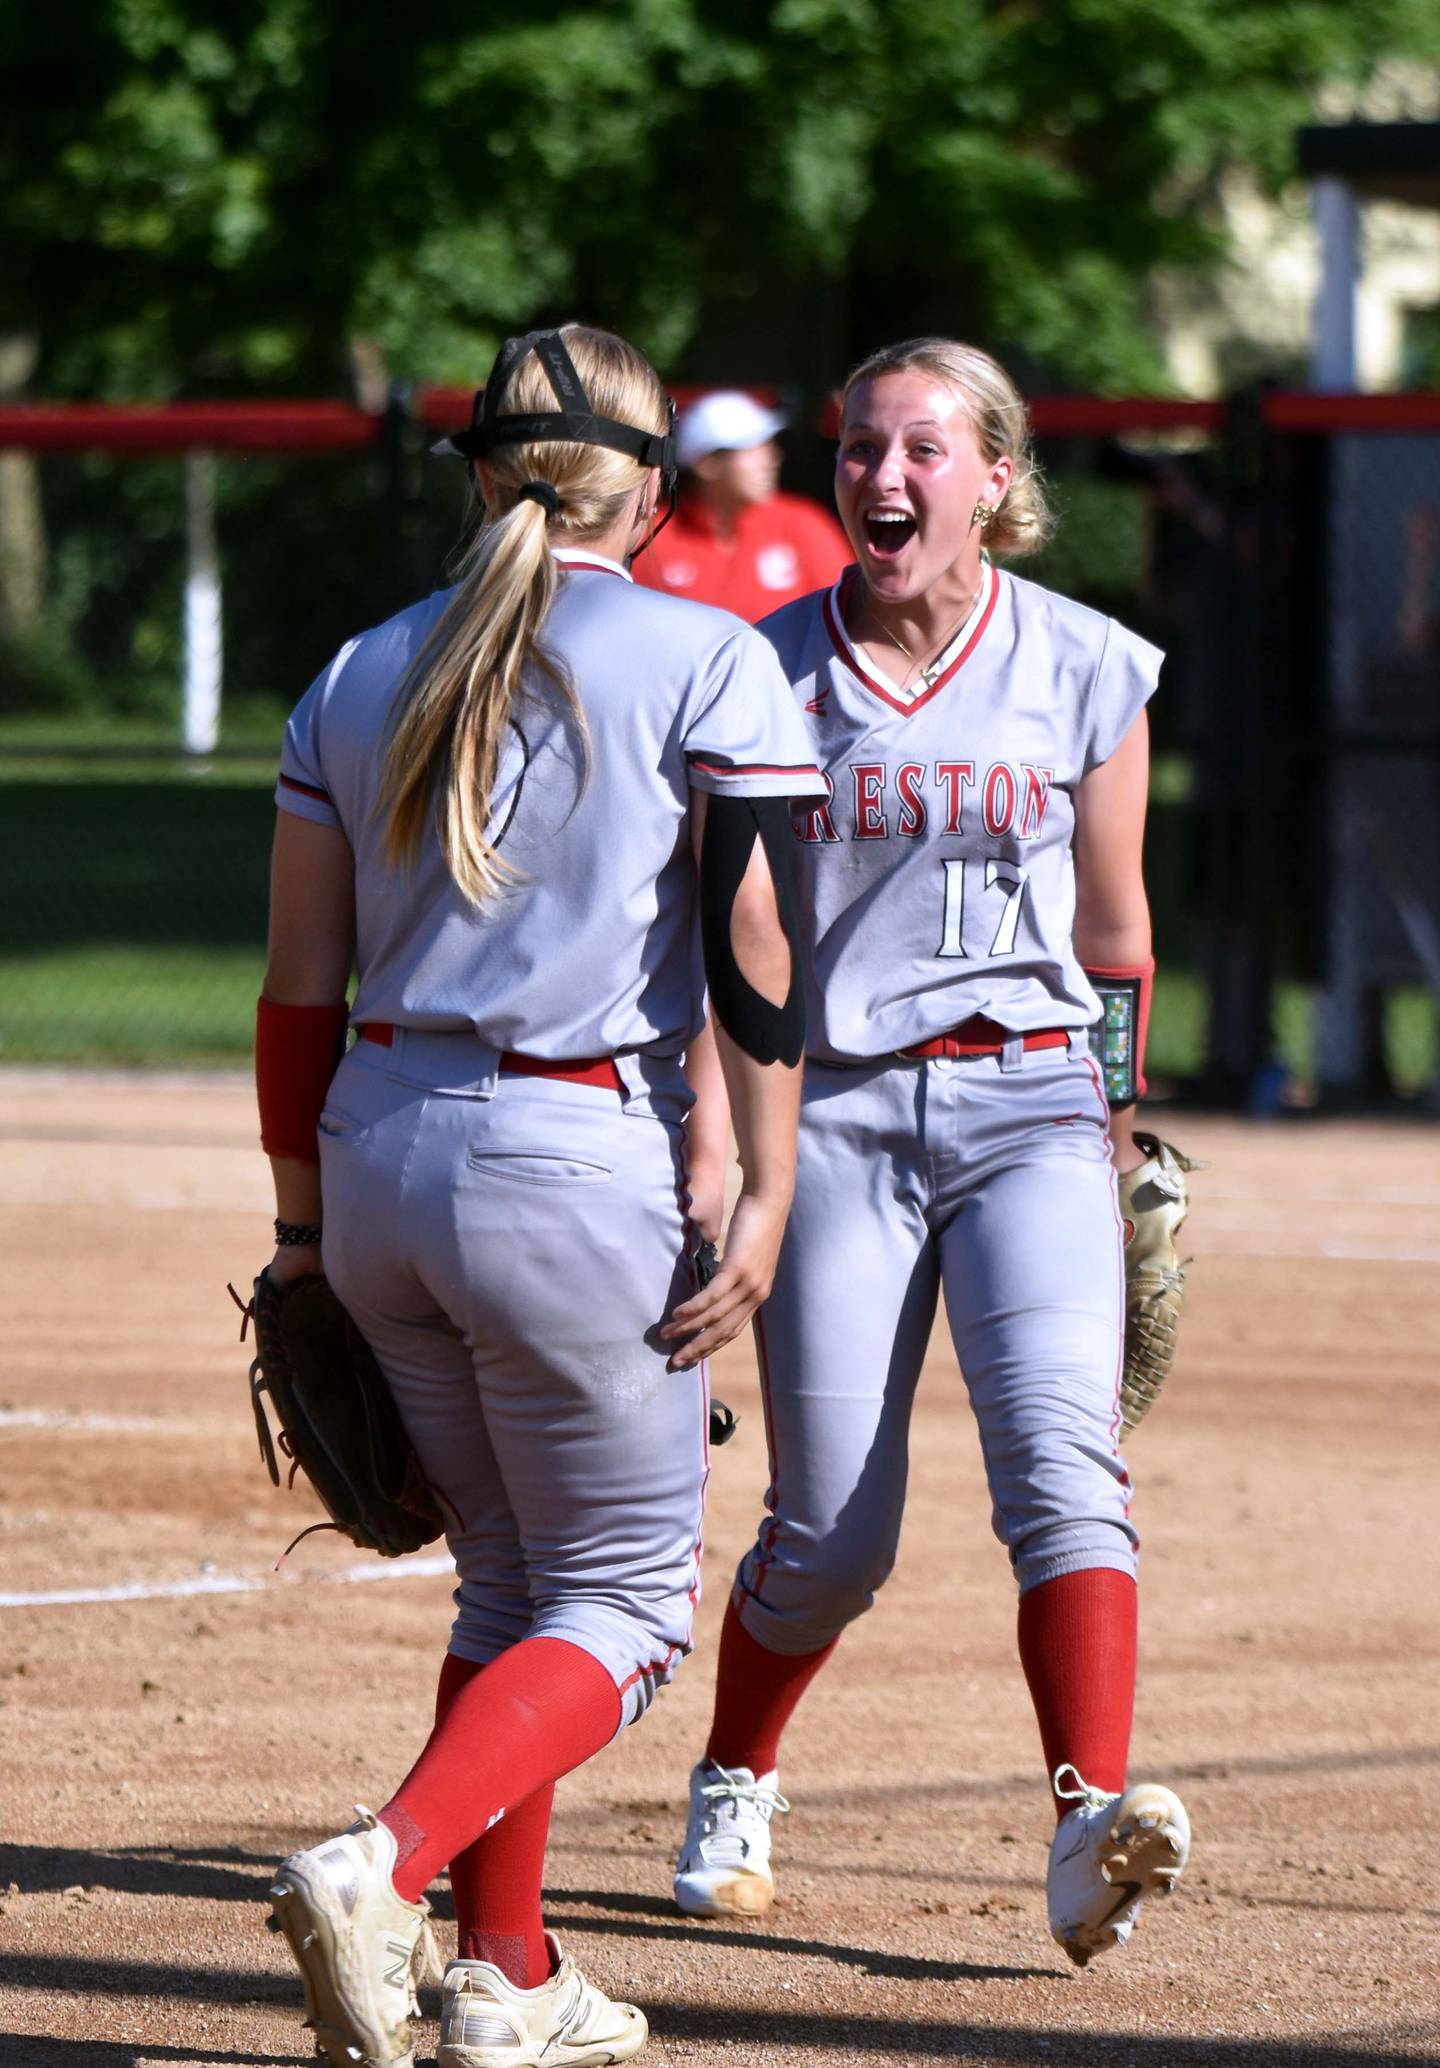 Pitcher Taryn Fredrickson, right, celebrates with third baseman Evy Marlin on her impressive double play in the second inning.